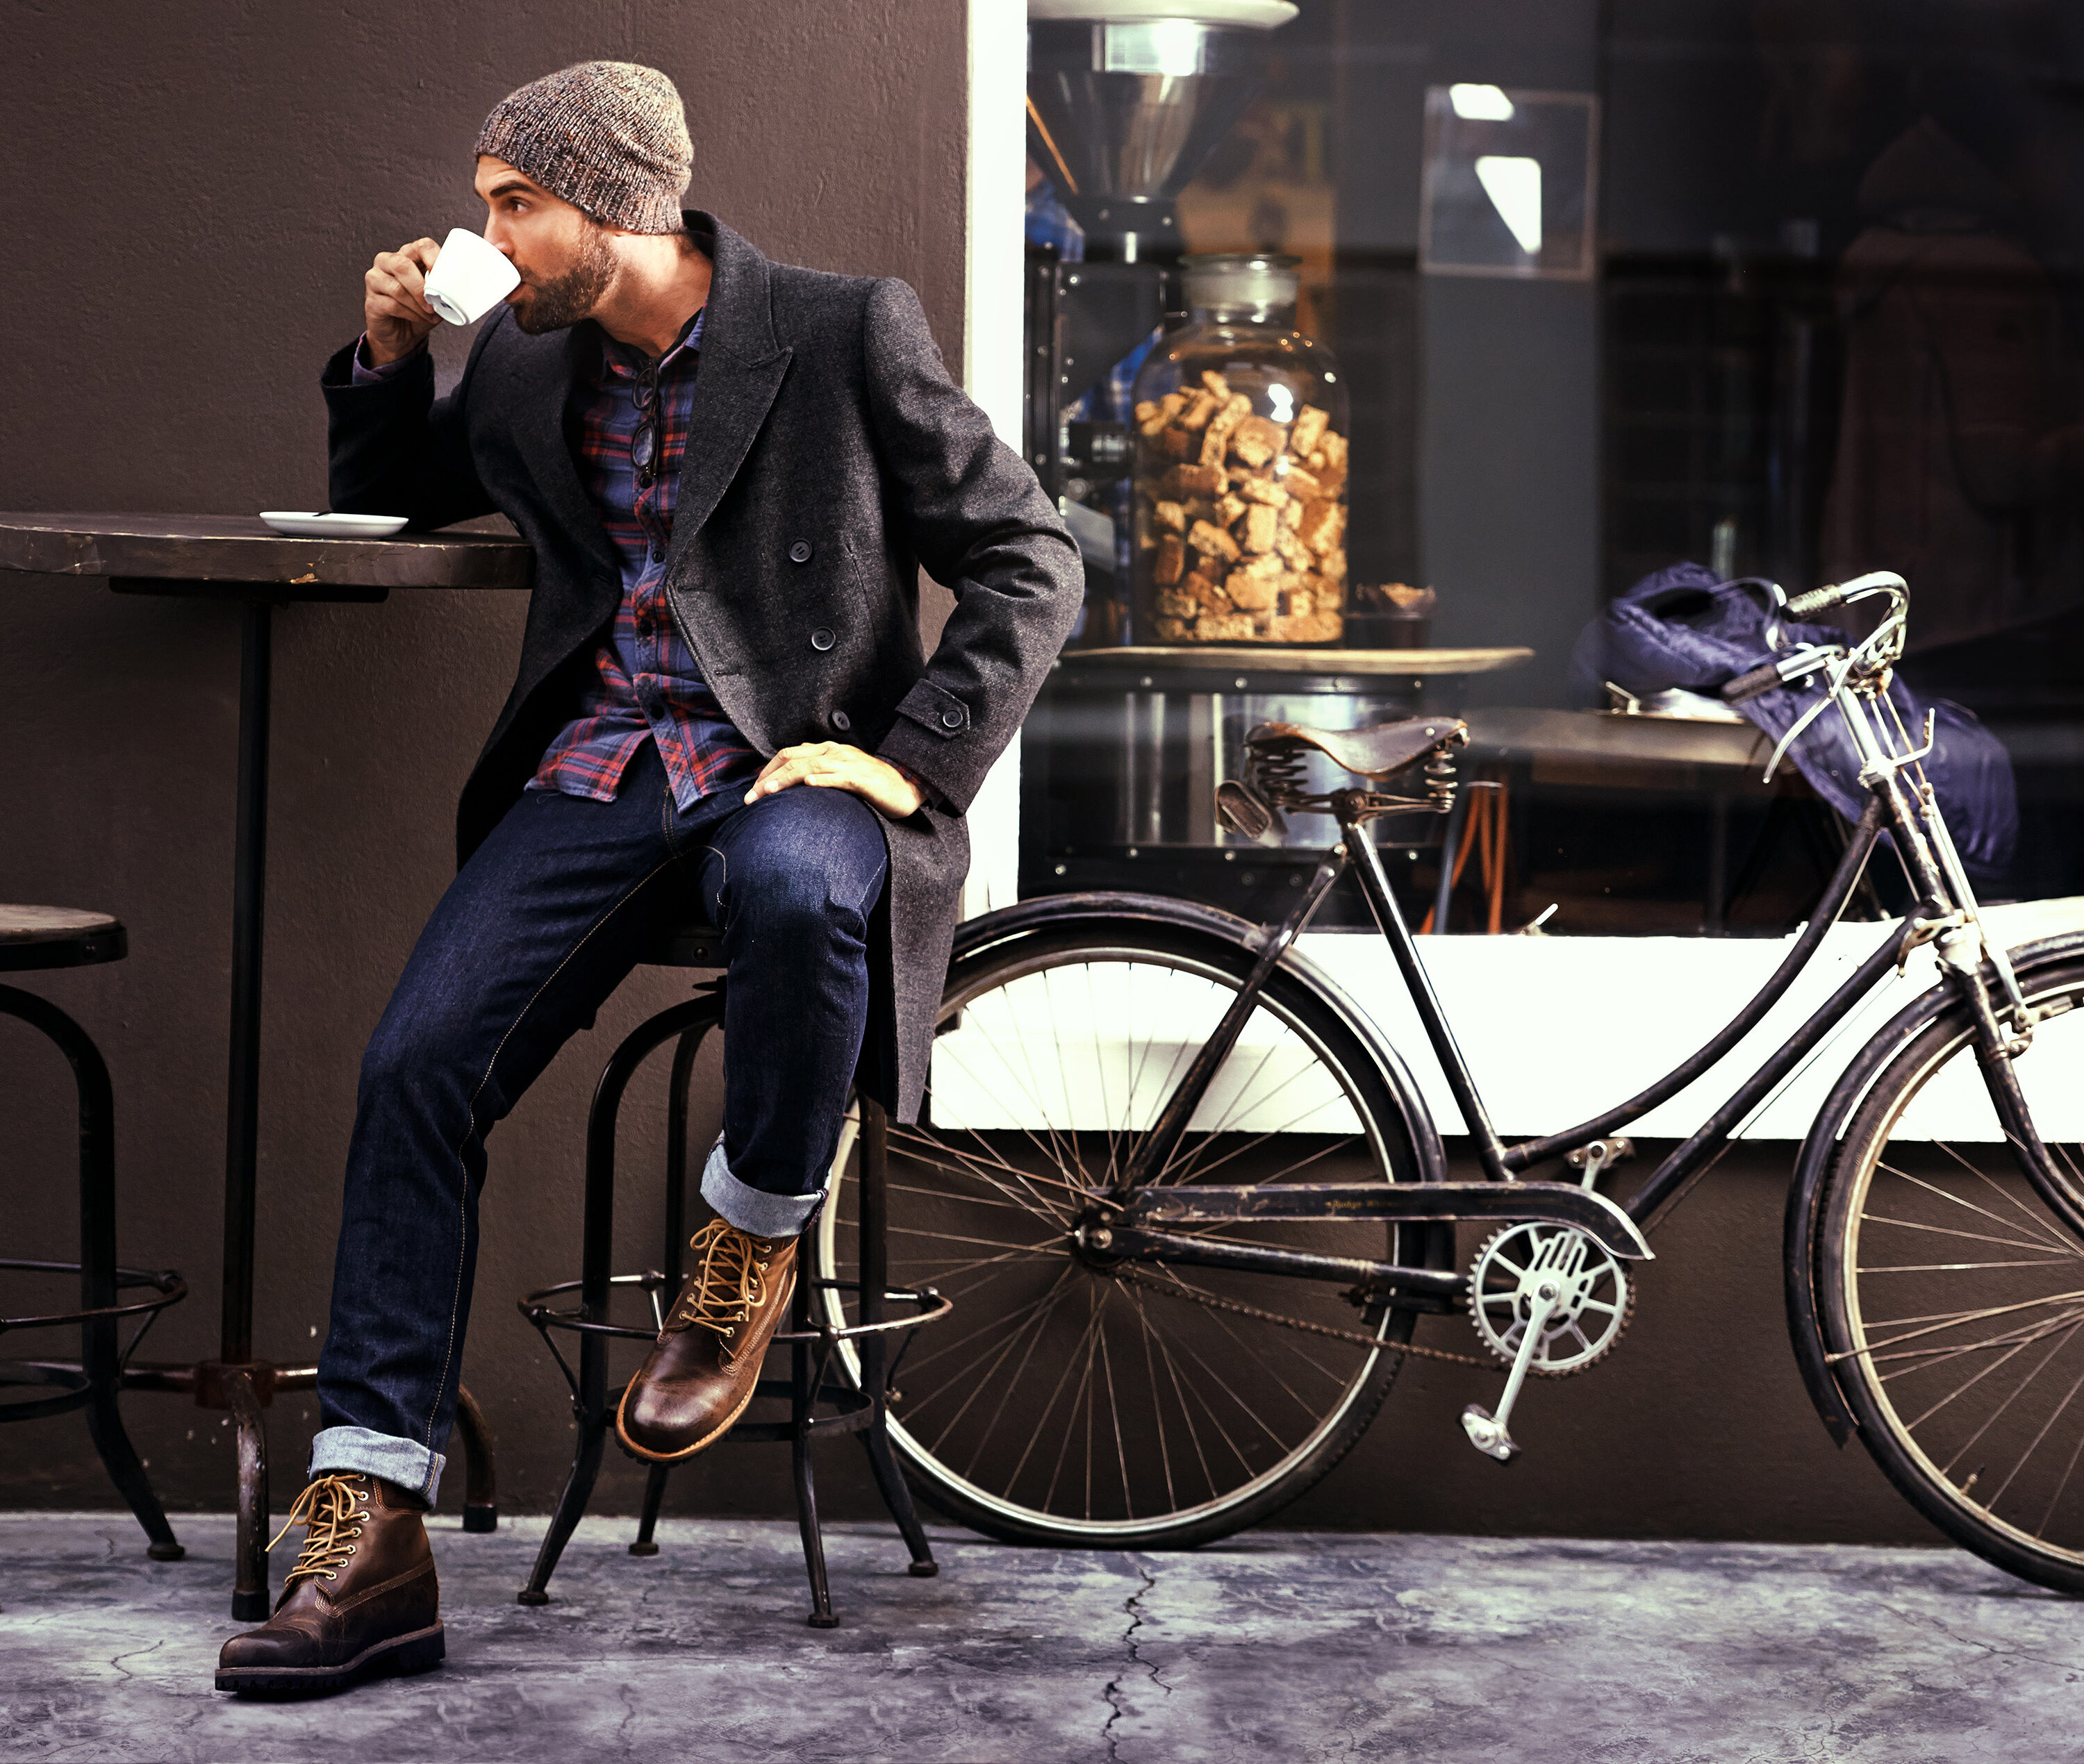 Shot of a handsome young man enjoying a cup of coffee at a cafe in the city while his bike stands next to him